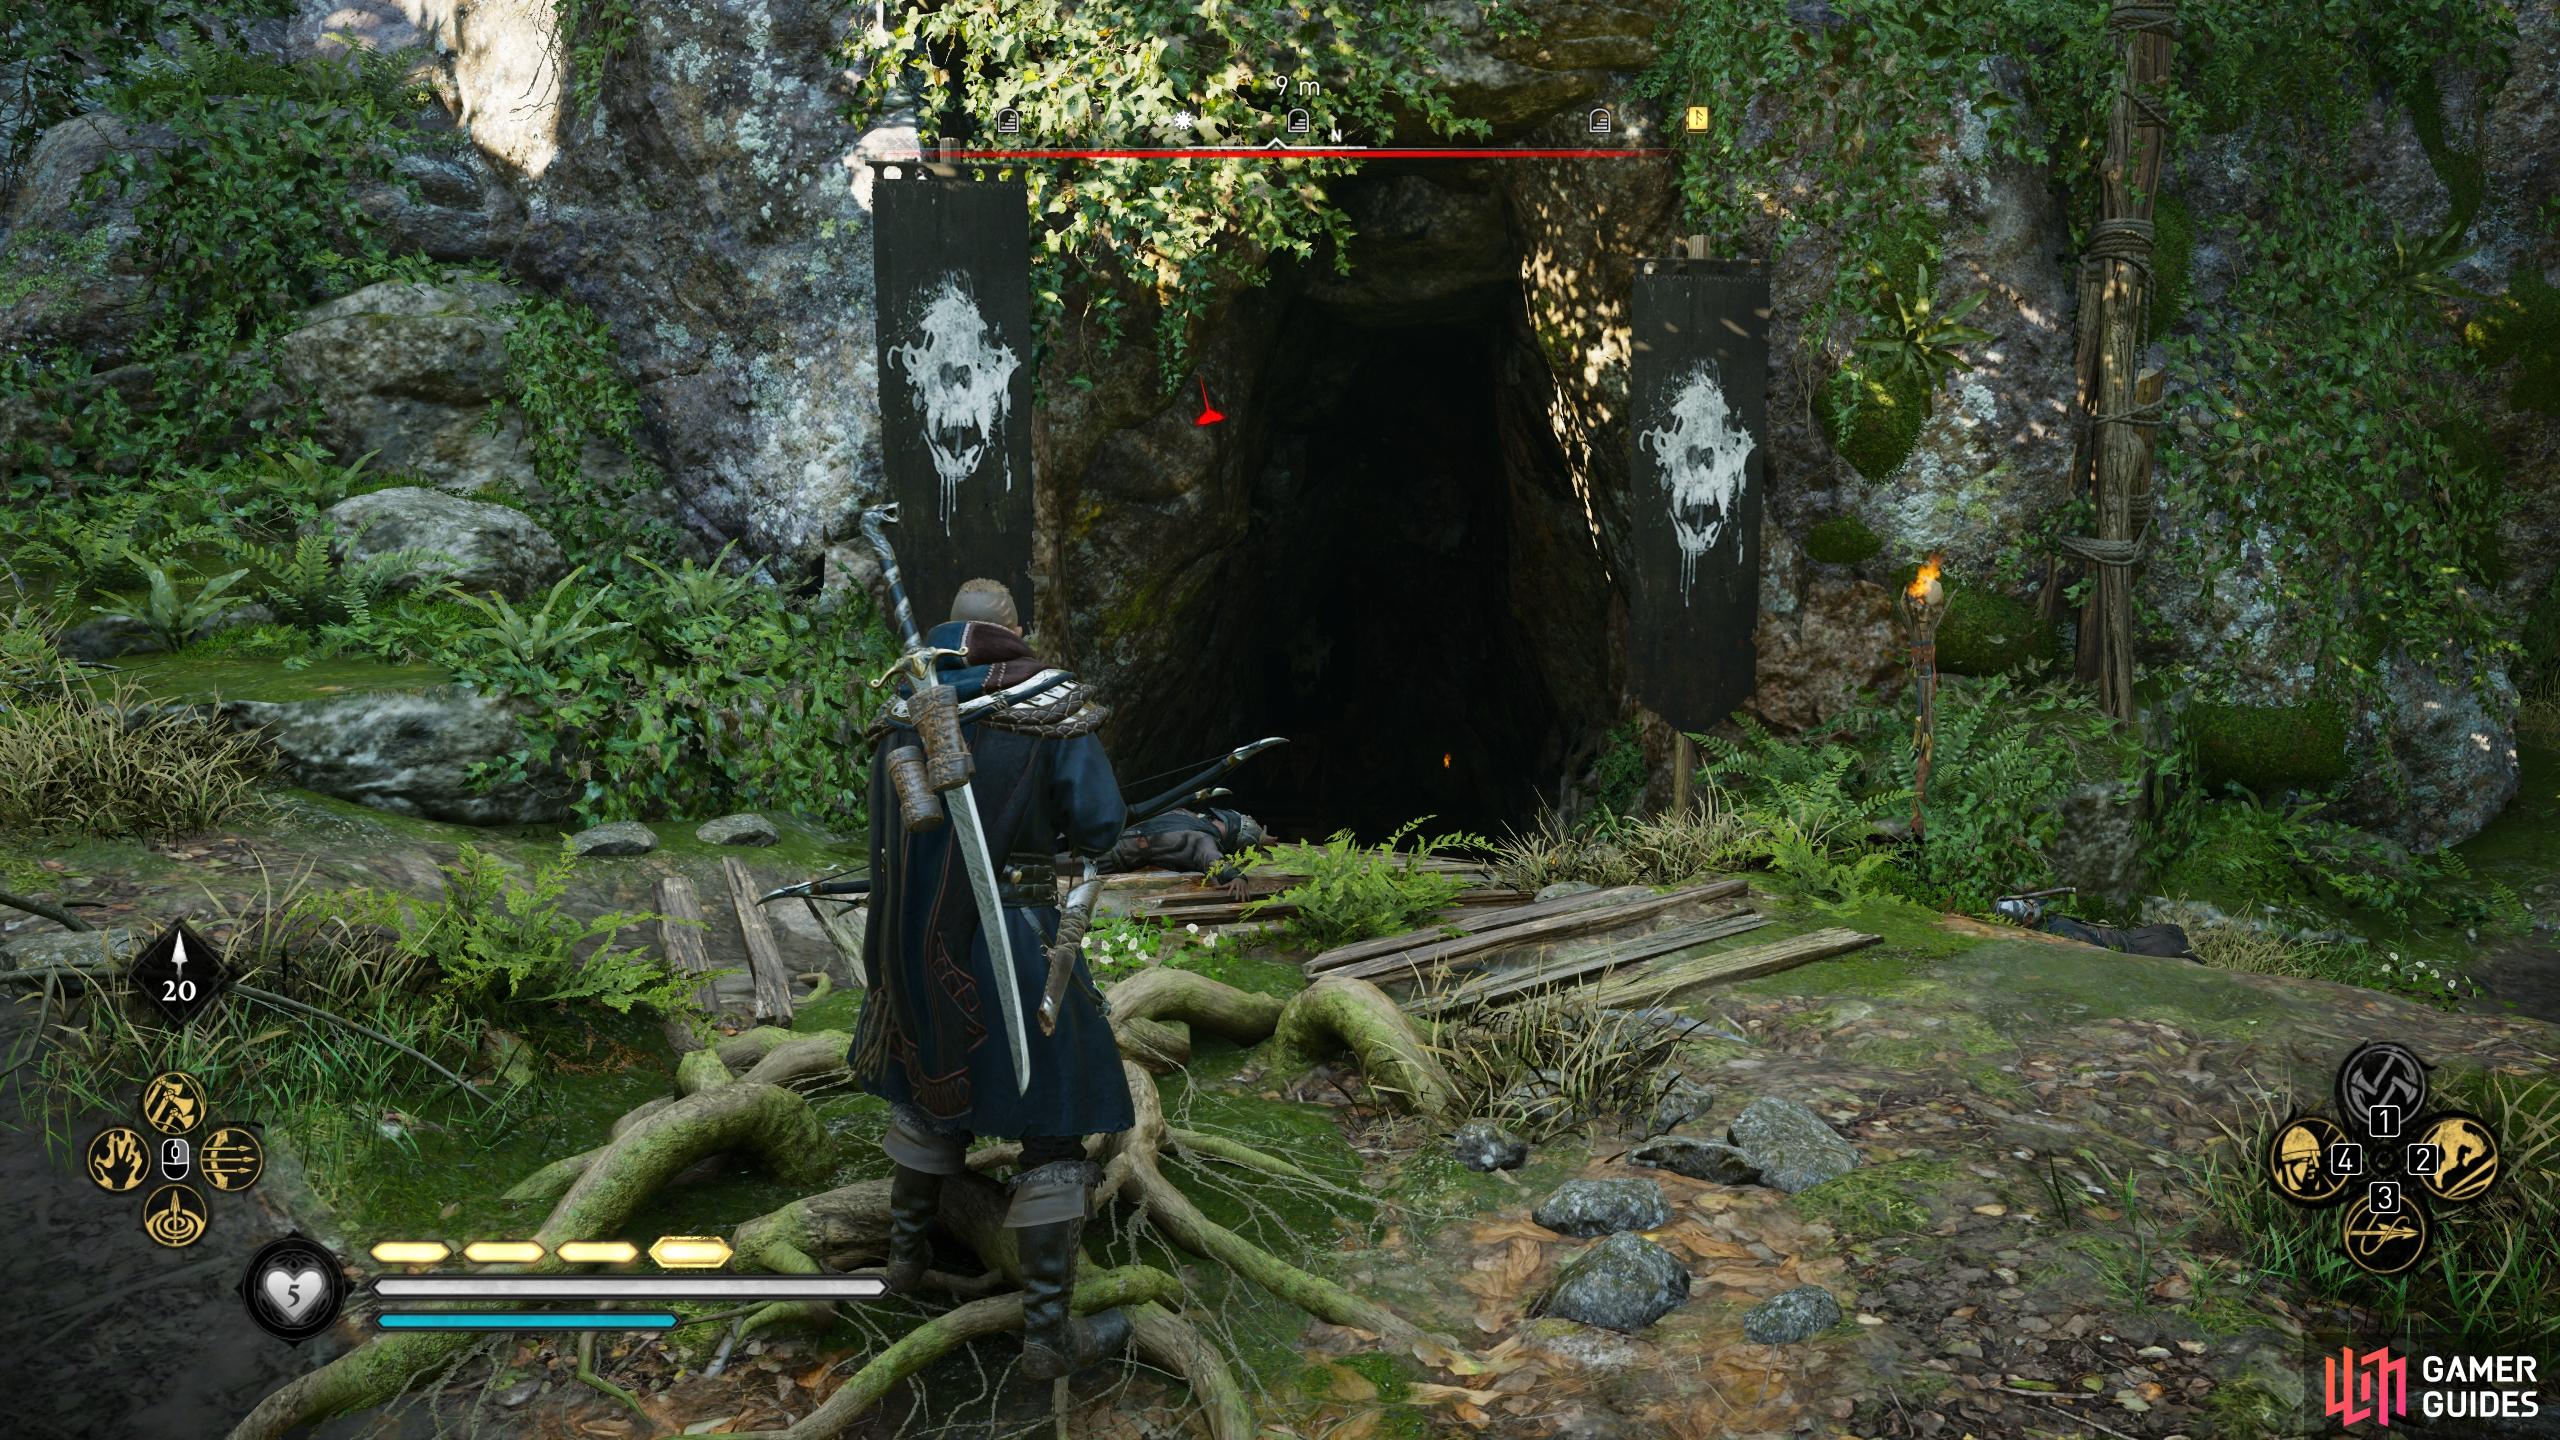 The entrance to the cave is marked by two black and white banners.